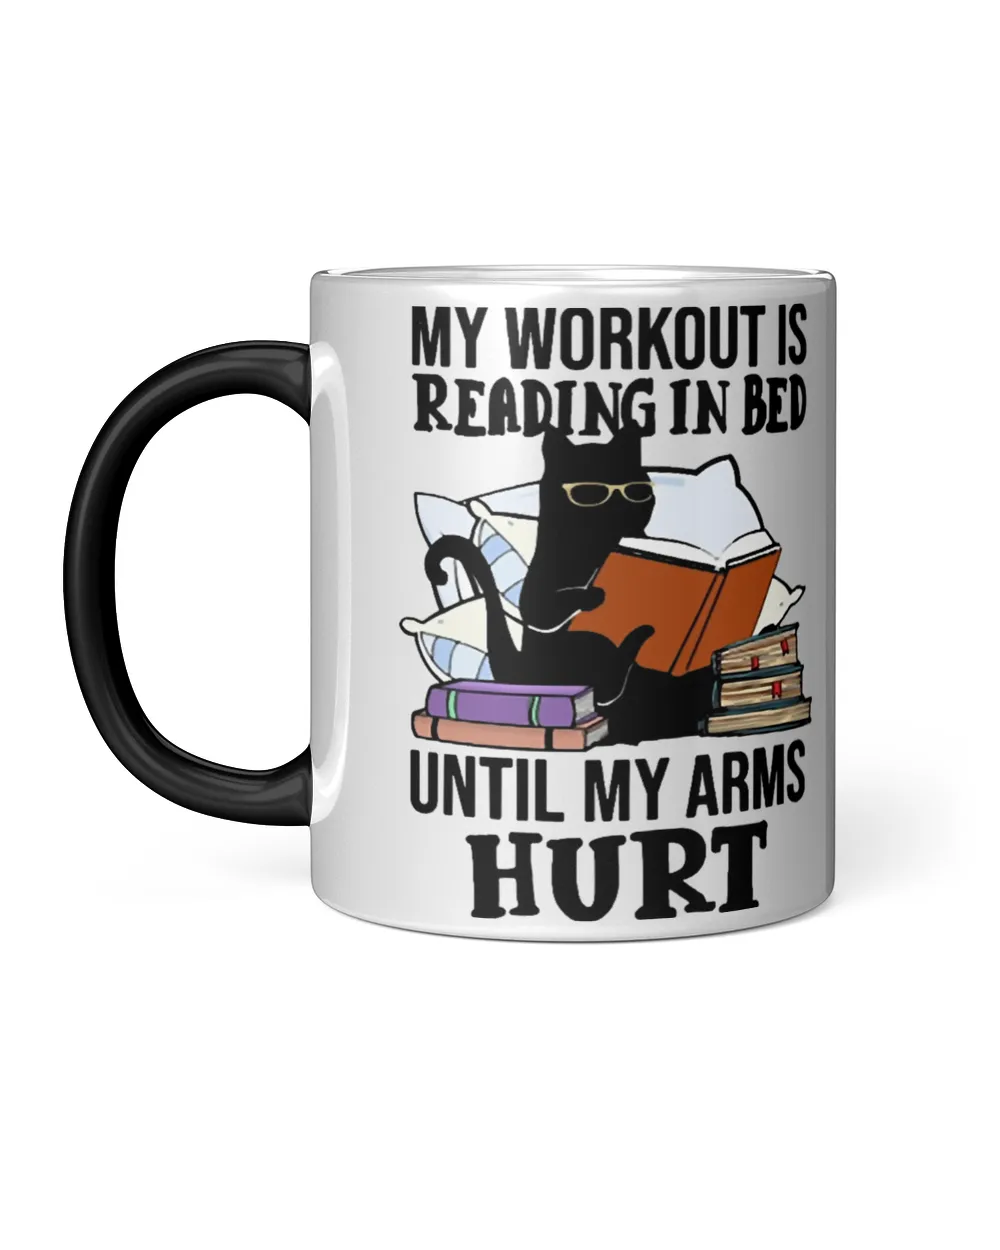 Black Cat Kitty My workout is reading in bed until my arms hurt funny gifts 561 paws Kitten Cat